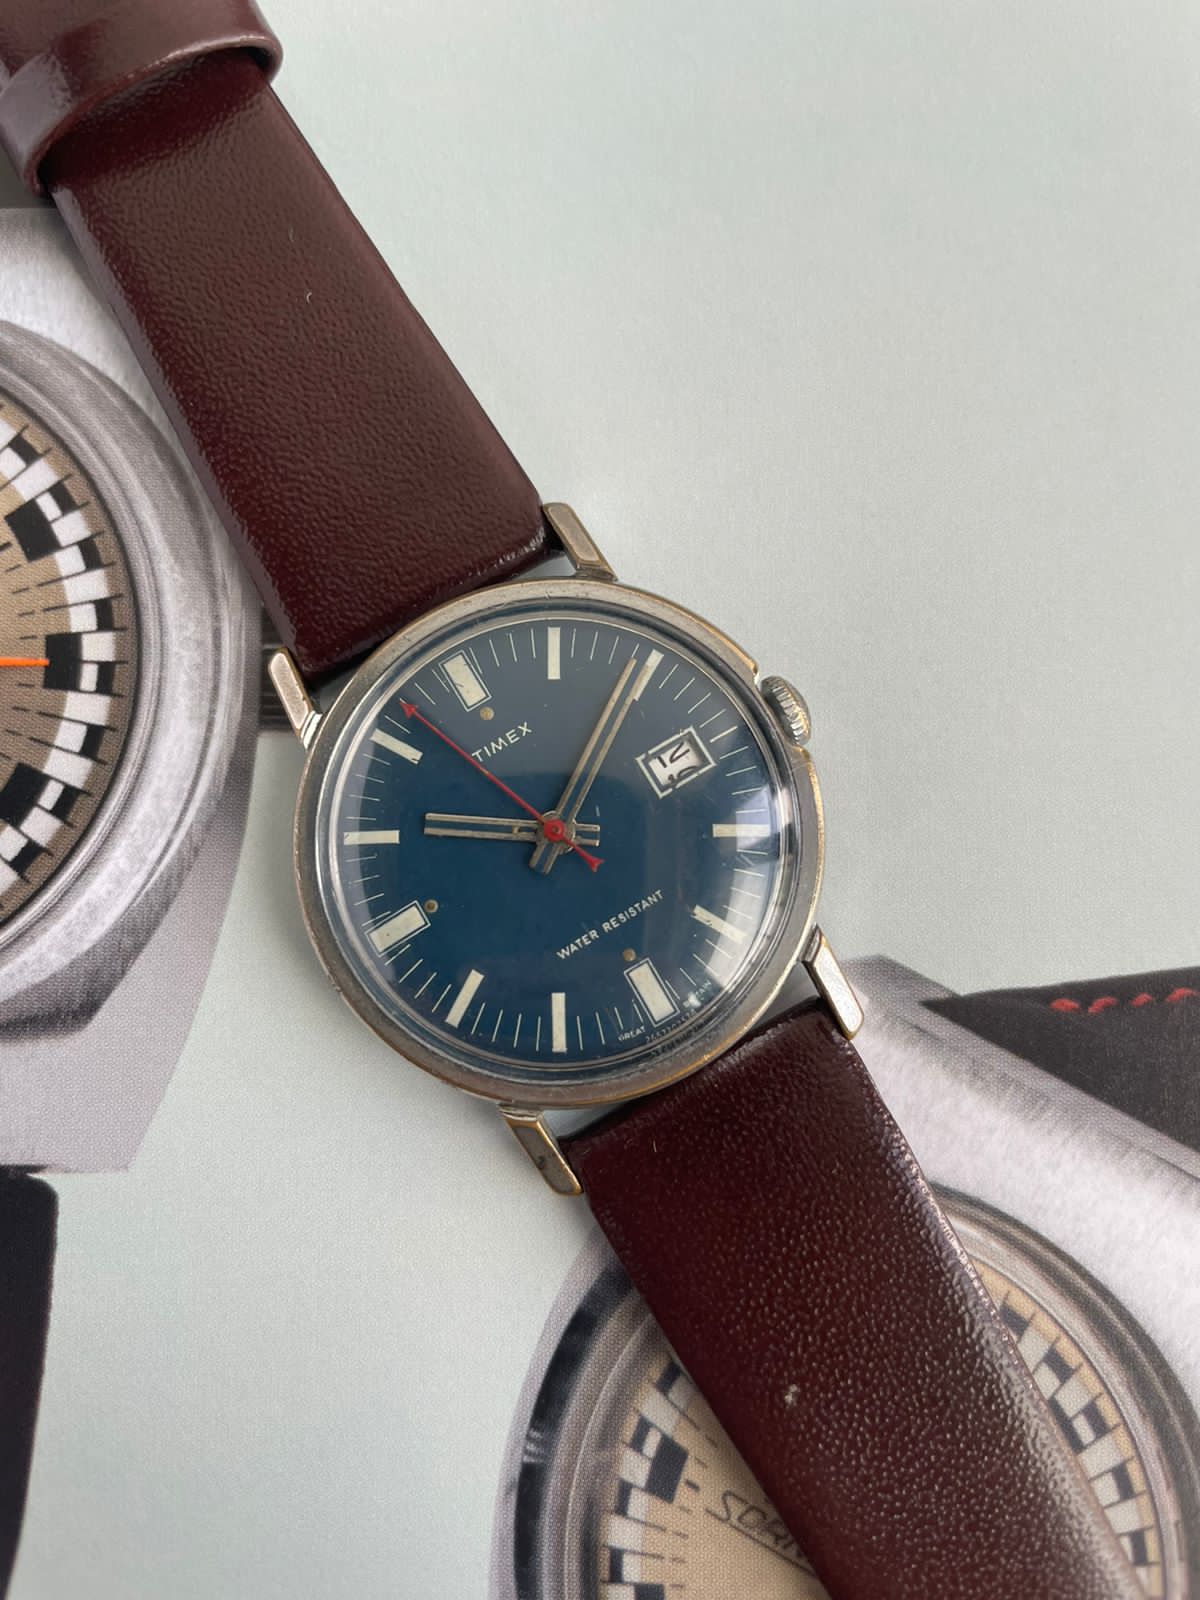 Introducing the Heritage1854.com Site for Timex Watch Collectors - Watch  Hunter - Watch Reviews, Photos and Articles